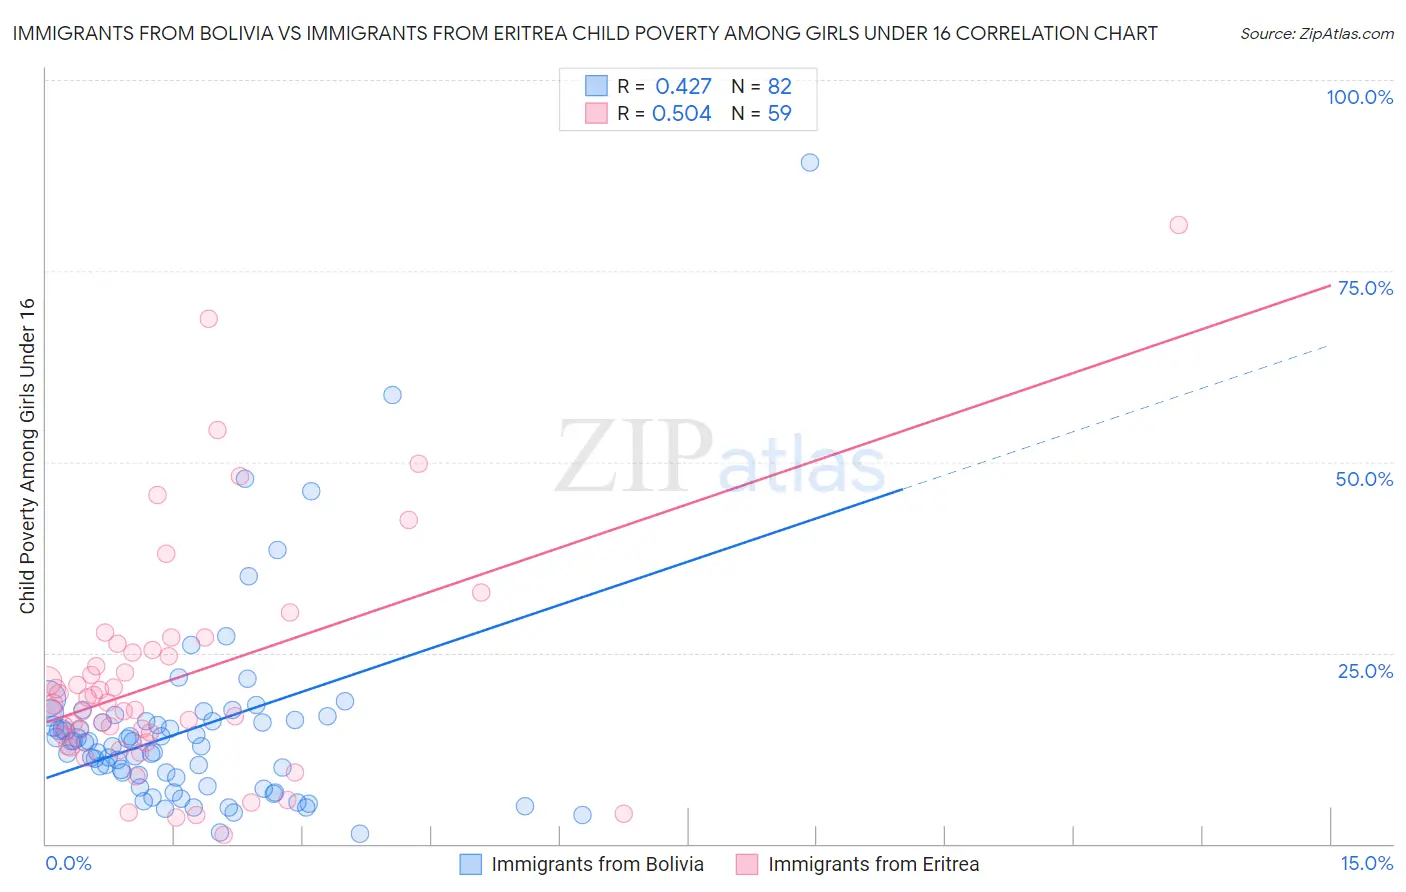 Immigrants from Bolivia vs Immigrants from Eritrea Child Poverty Among Girls Under 16